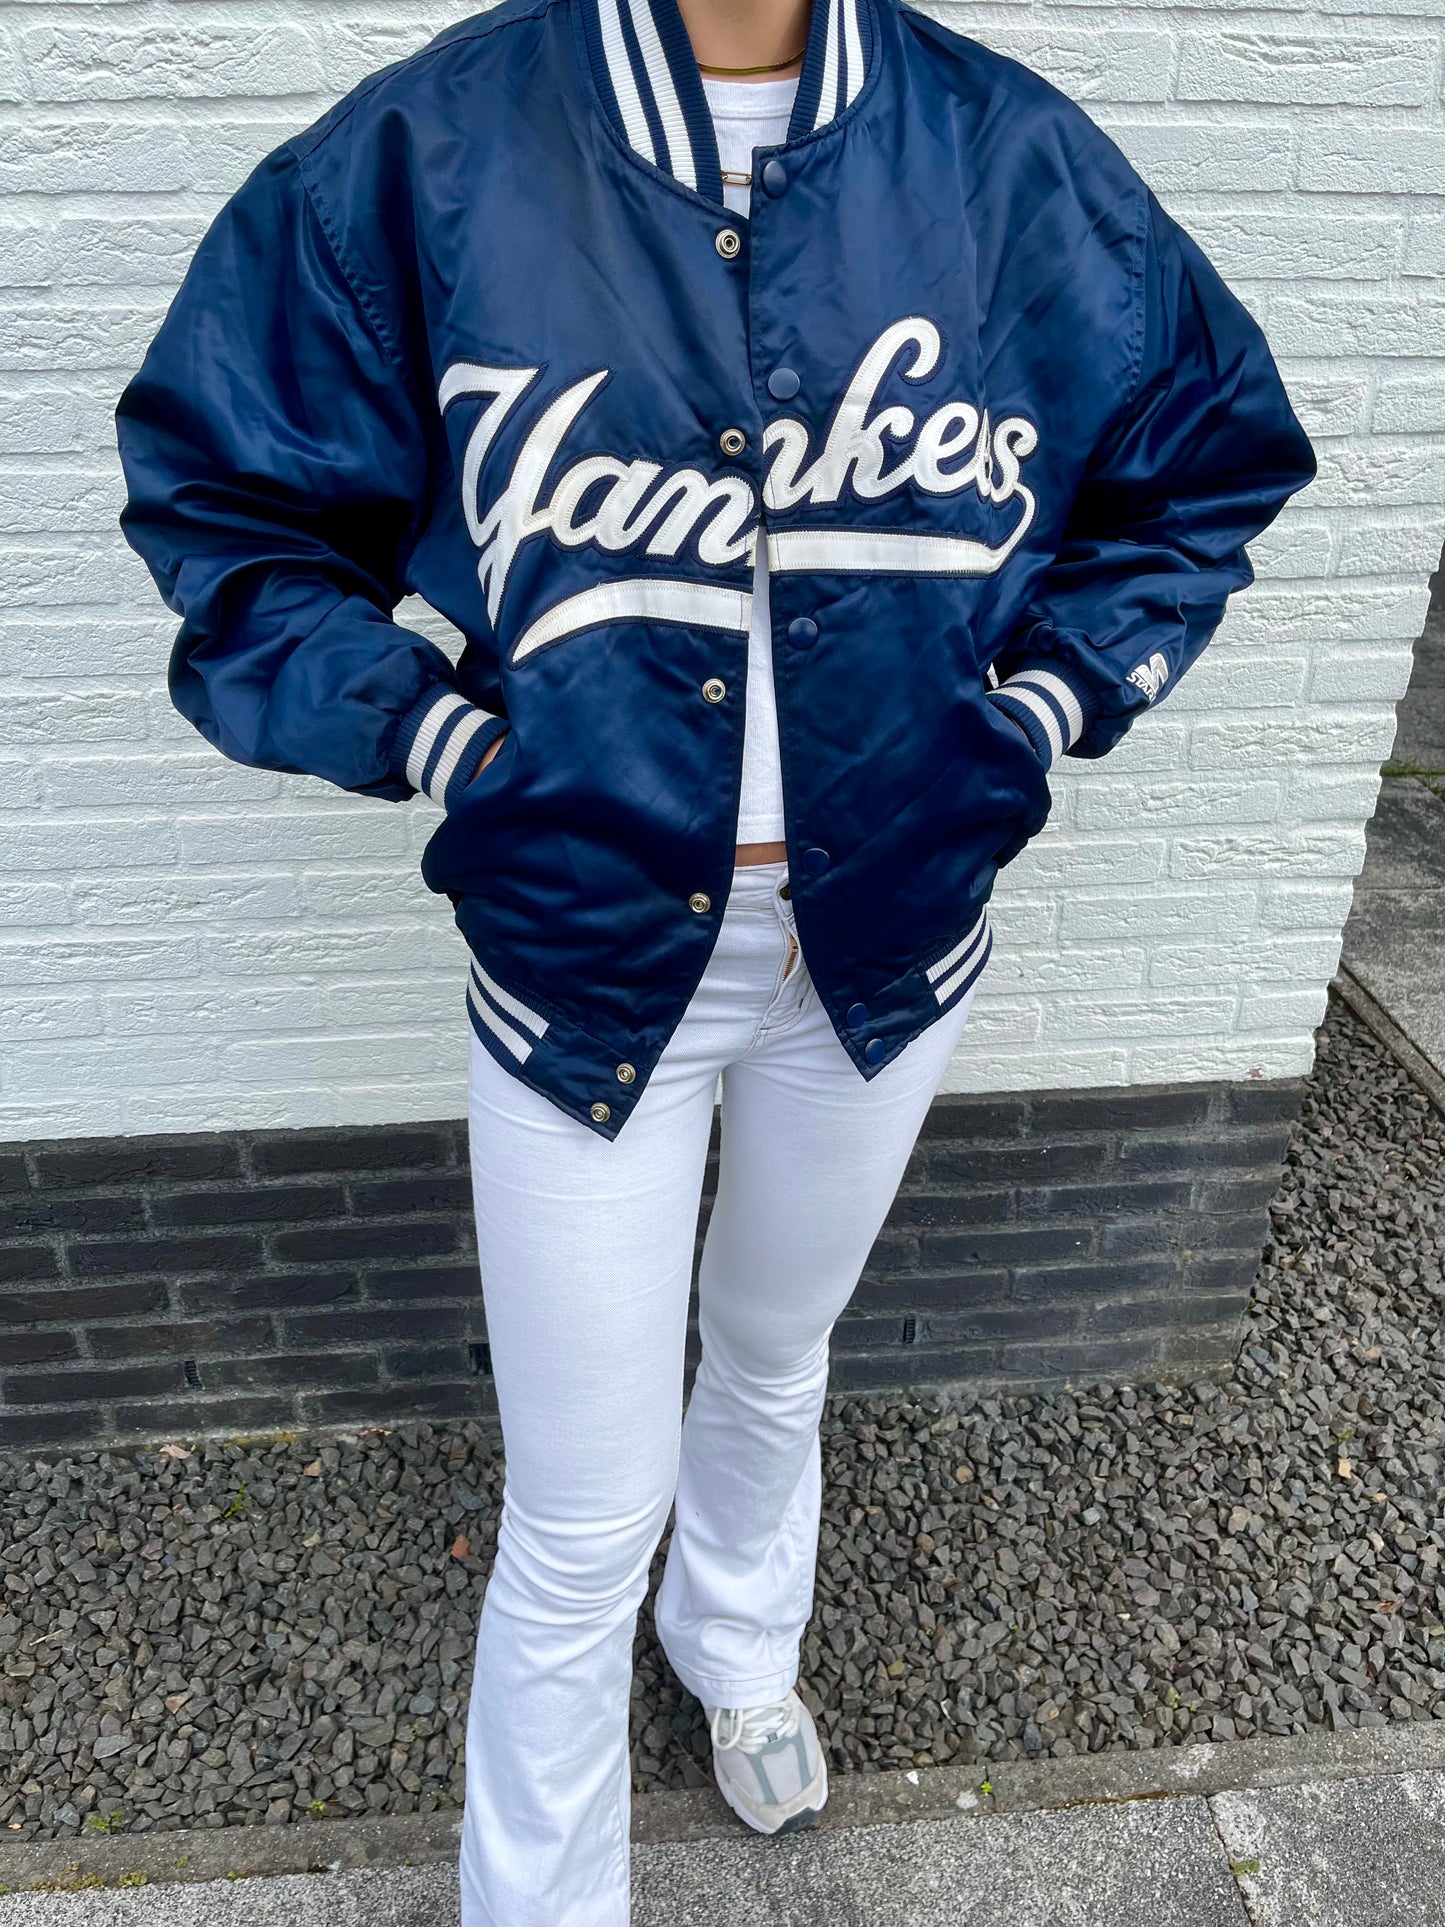 Starter New York Yankees spell-out jacket | Laura Stappers Vintage